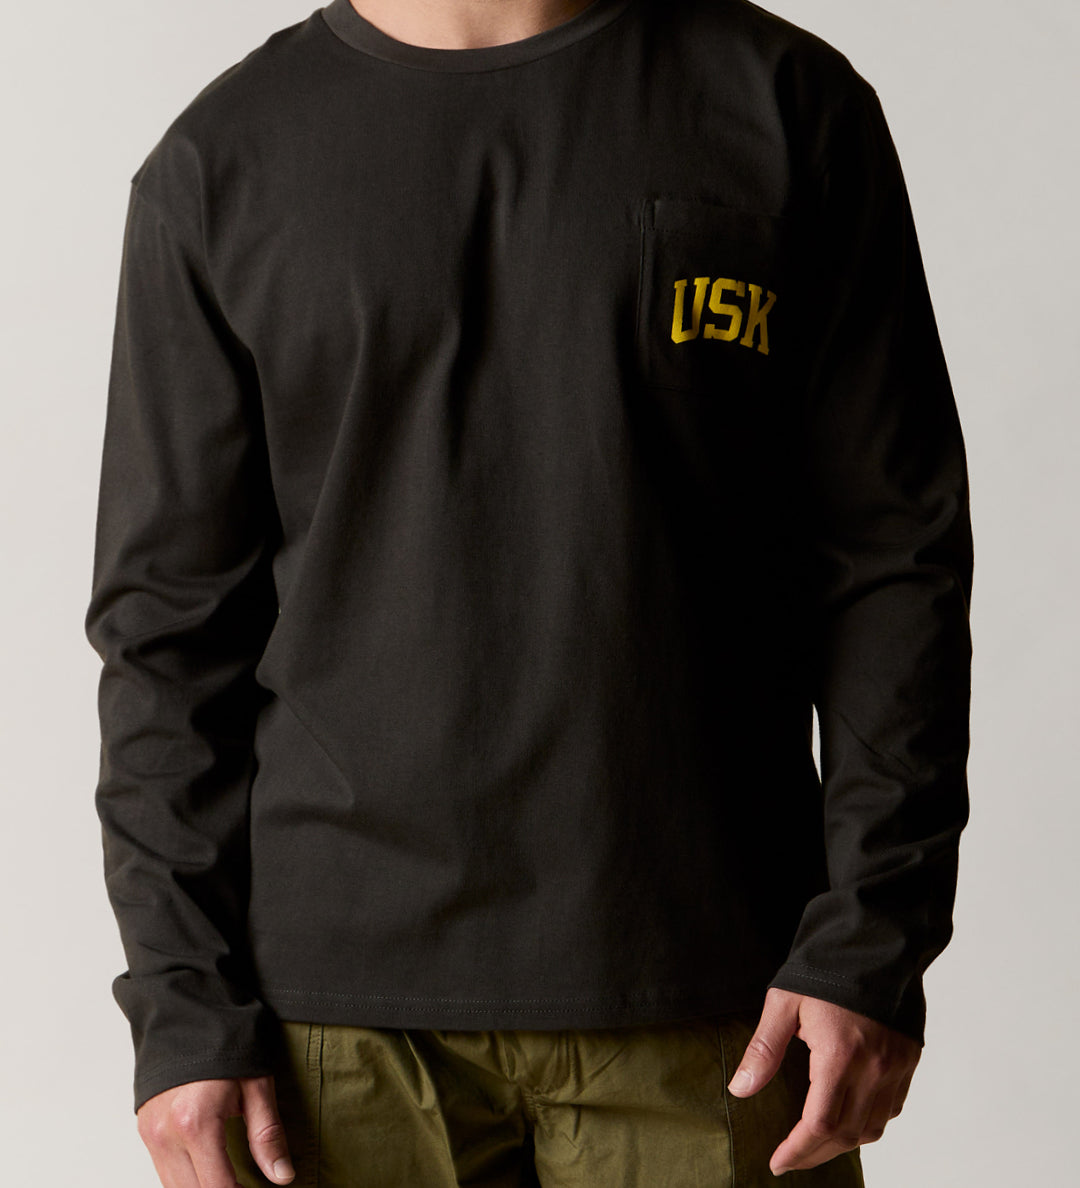 Model wearing the uskees faded black long sleeved Tee for men showing the yellow USK logo on the chest pocket